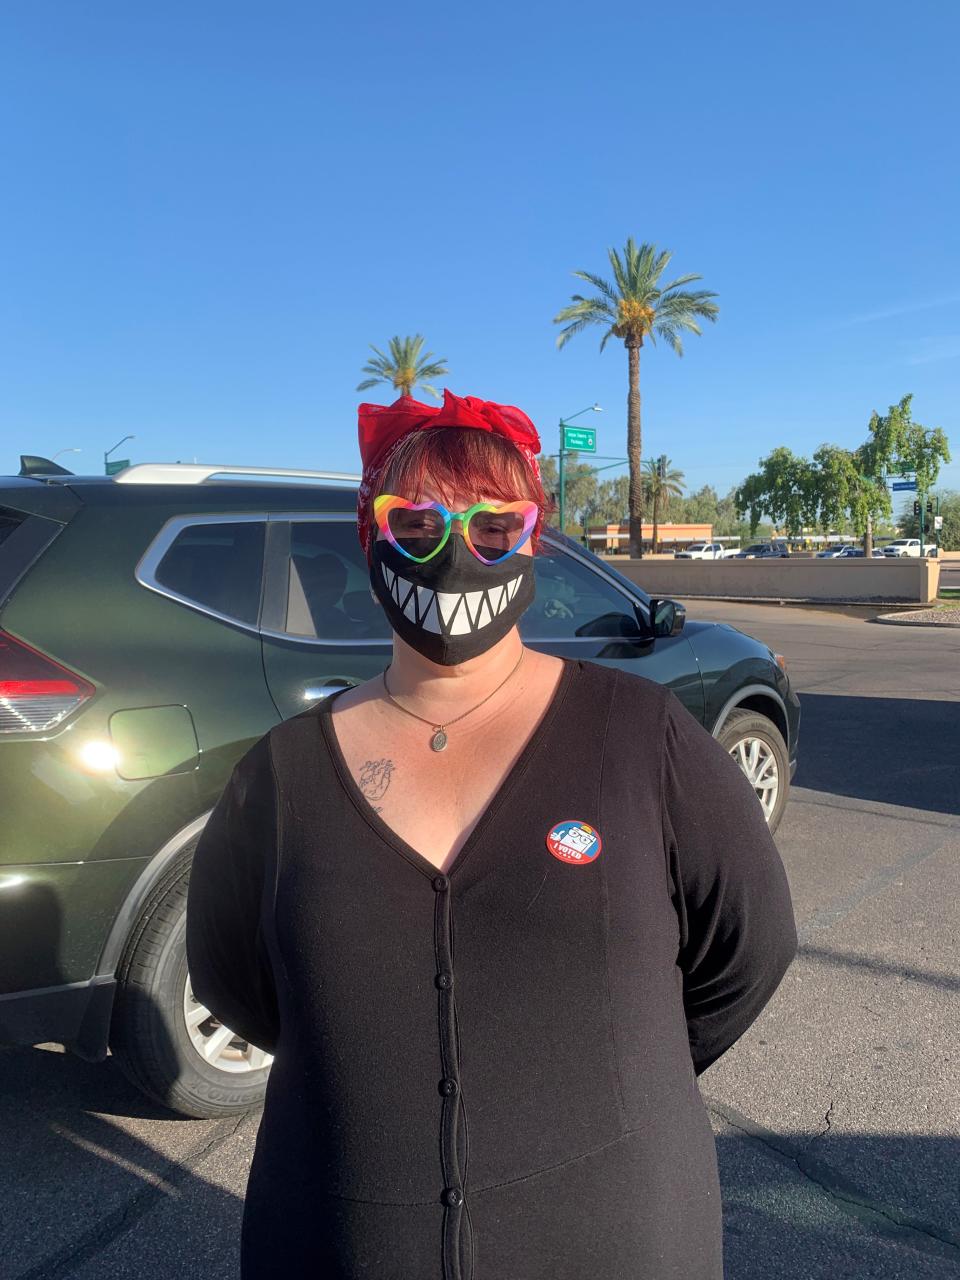 Jacqueline Graham, 41, who lives in South Phoenix said she had women’s rights in her mind when she cast her vote.